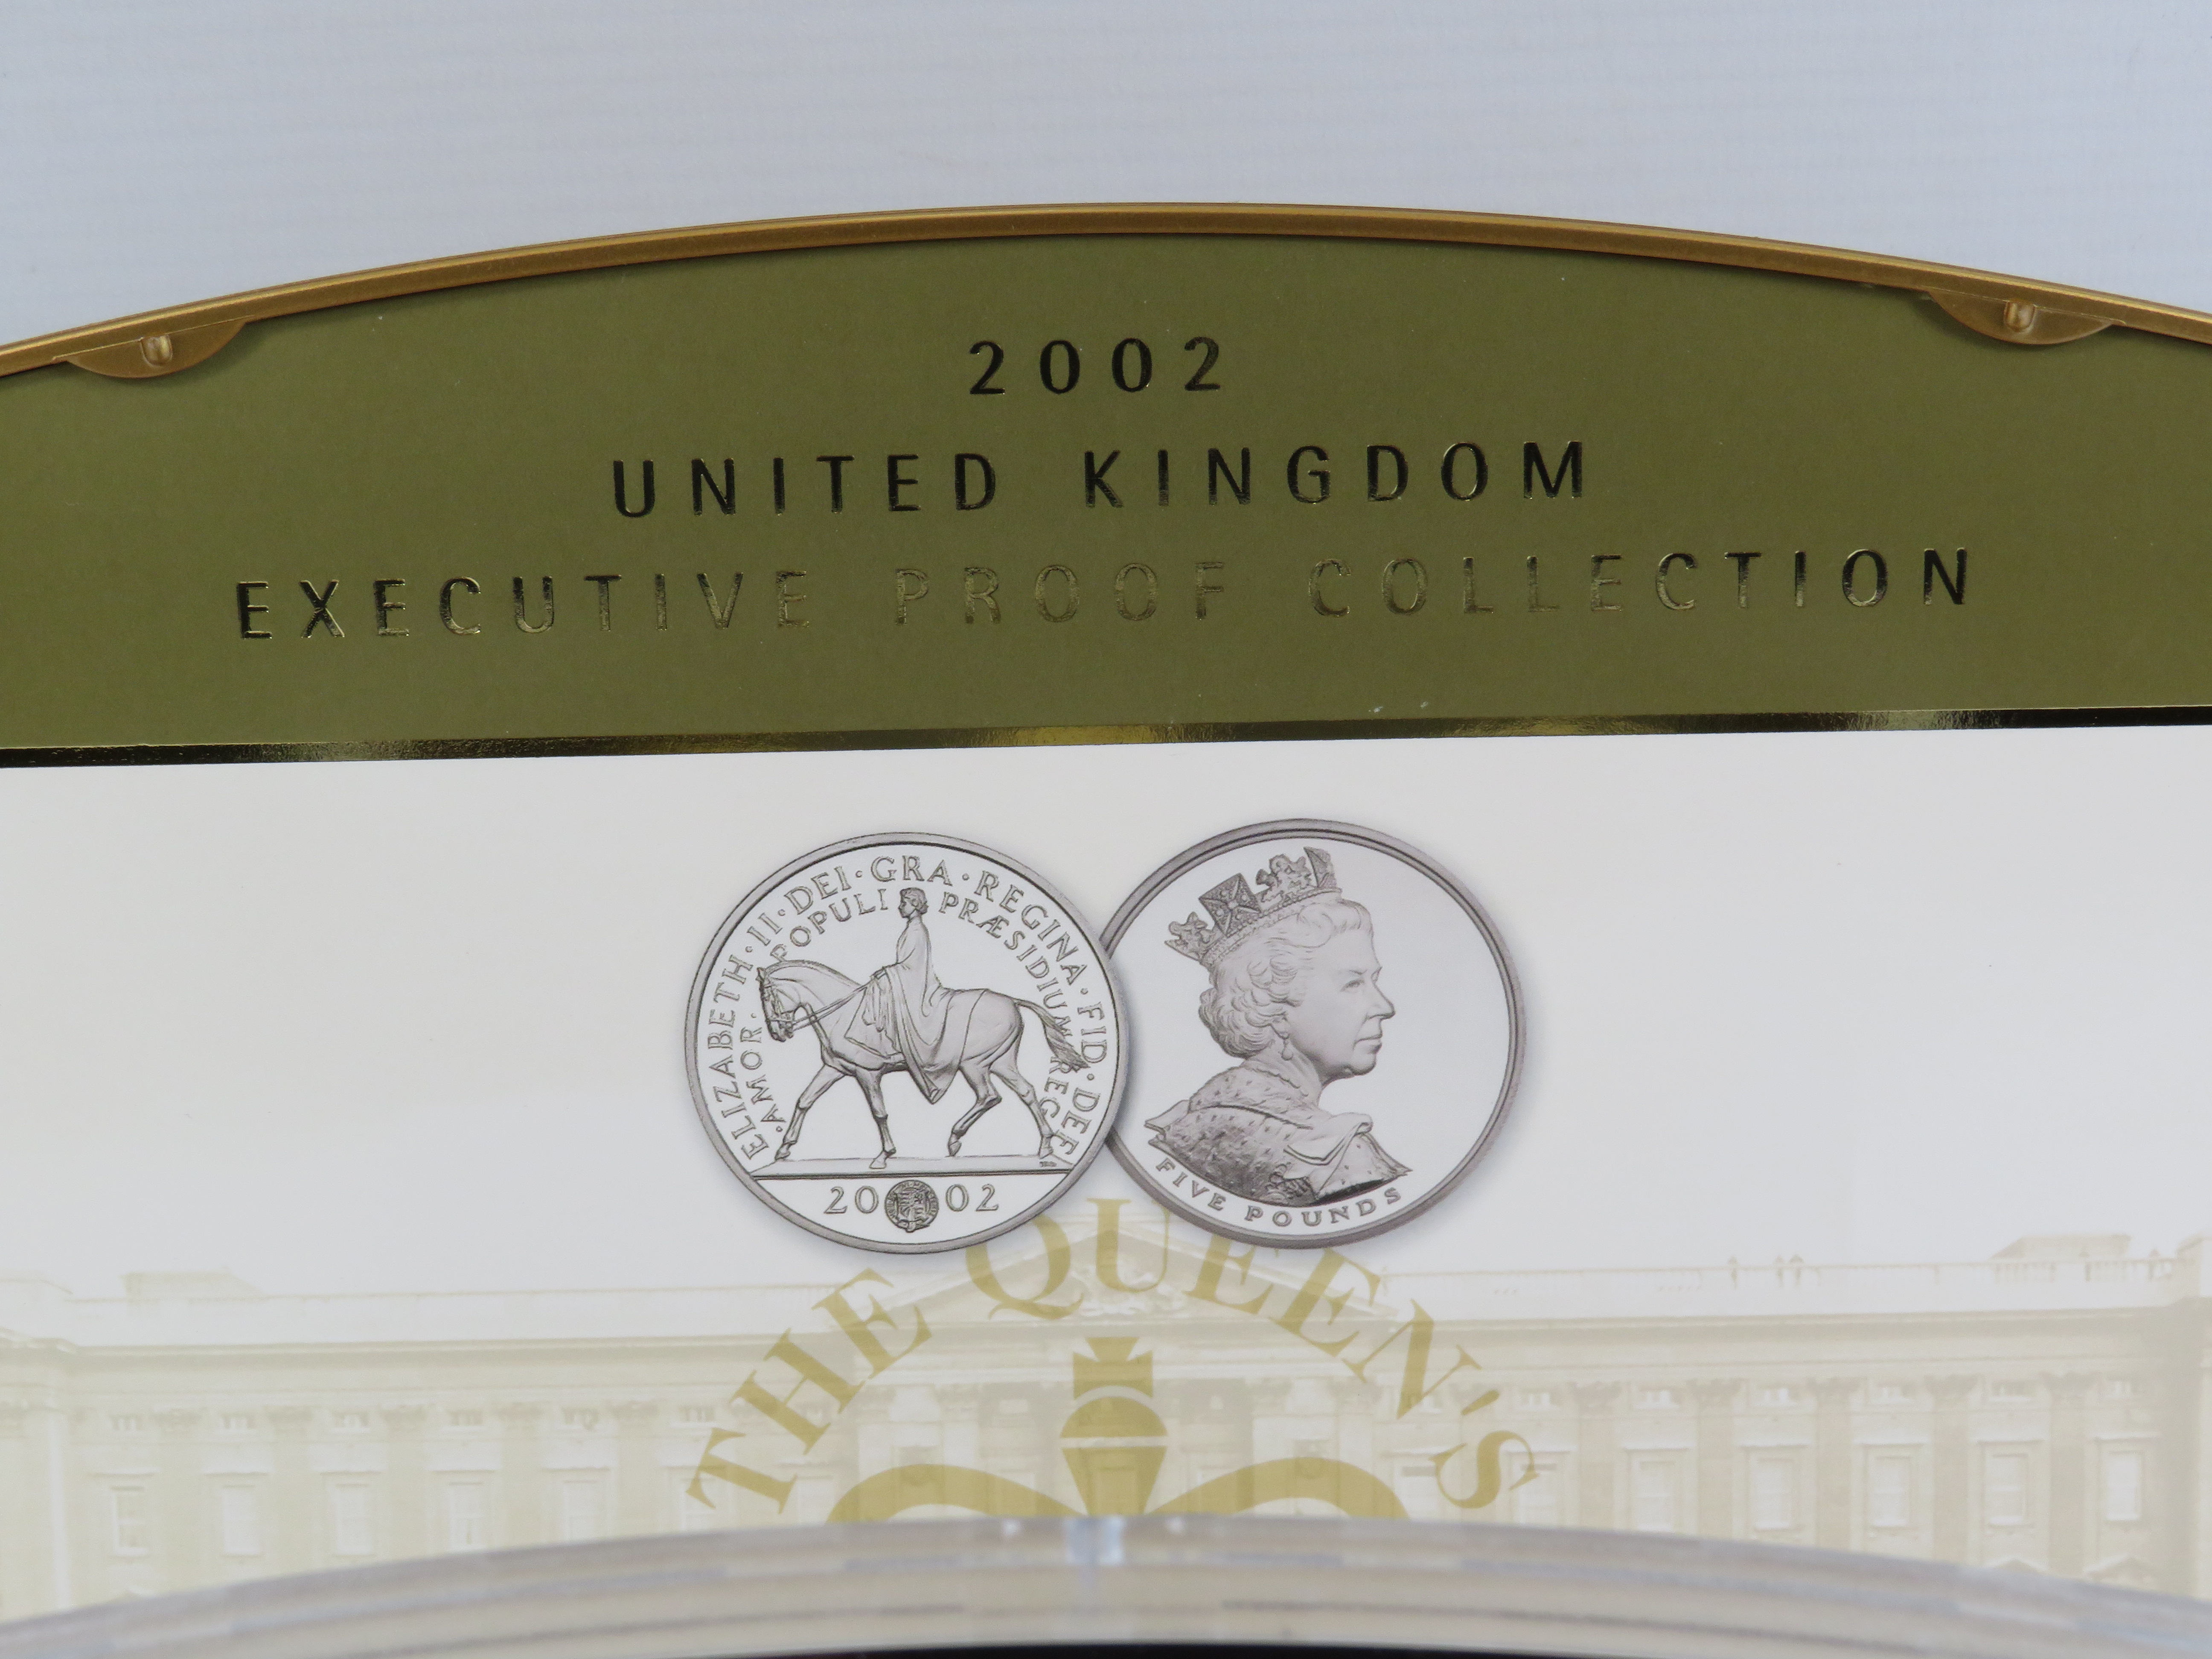 2002 United Kingdom Royal mint executive coin collection of the Golden Jubilee. - Image 2 of 4